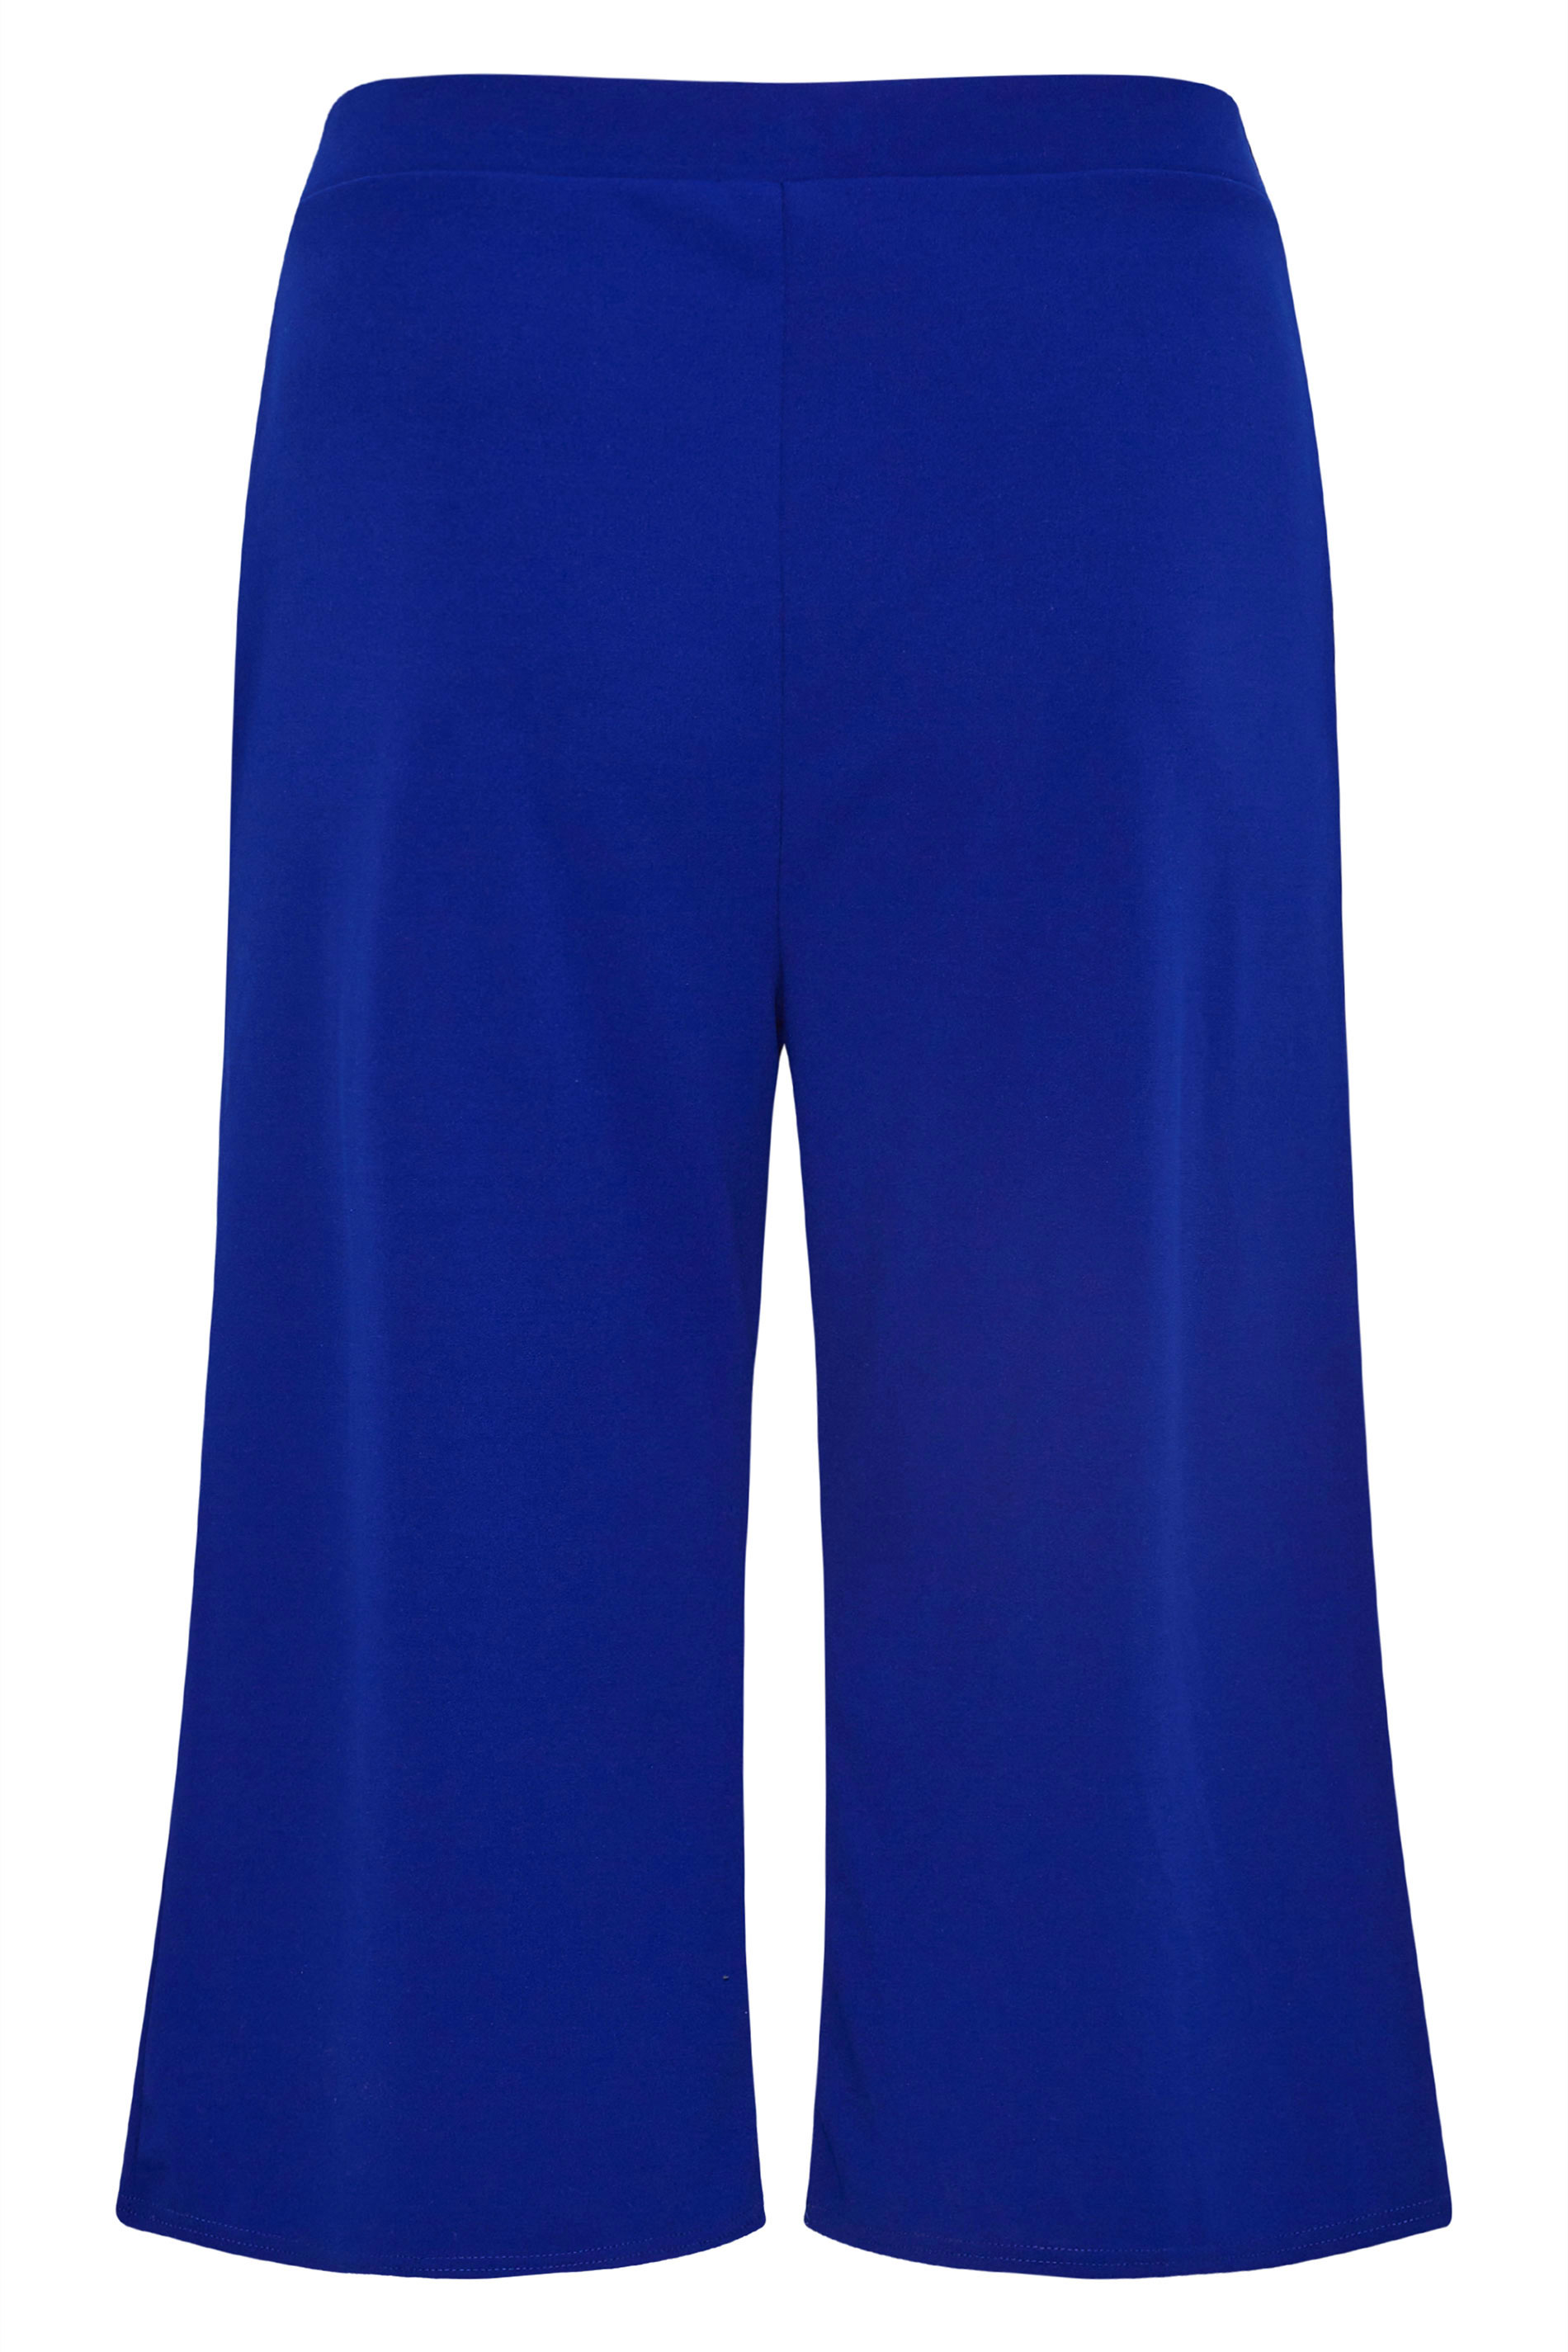 Grande taille  Pantalons Grande taille  Pantacourts | YOURS LONDON - Jupe-Culotte Bleu Roi Coupe Ample - OD74208